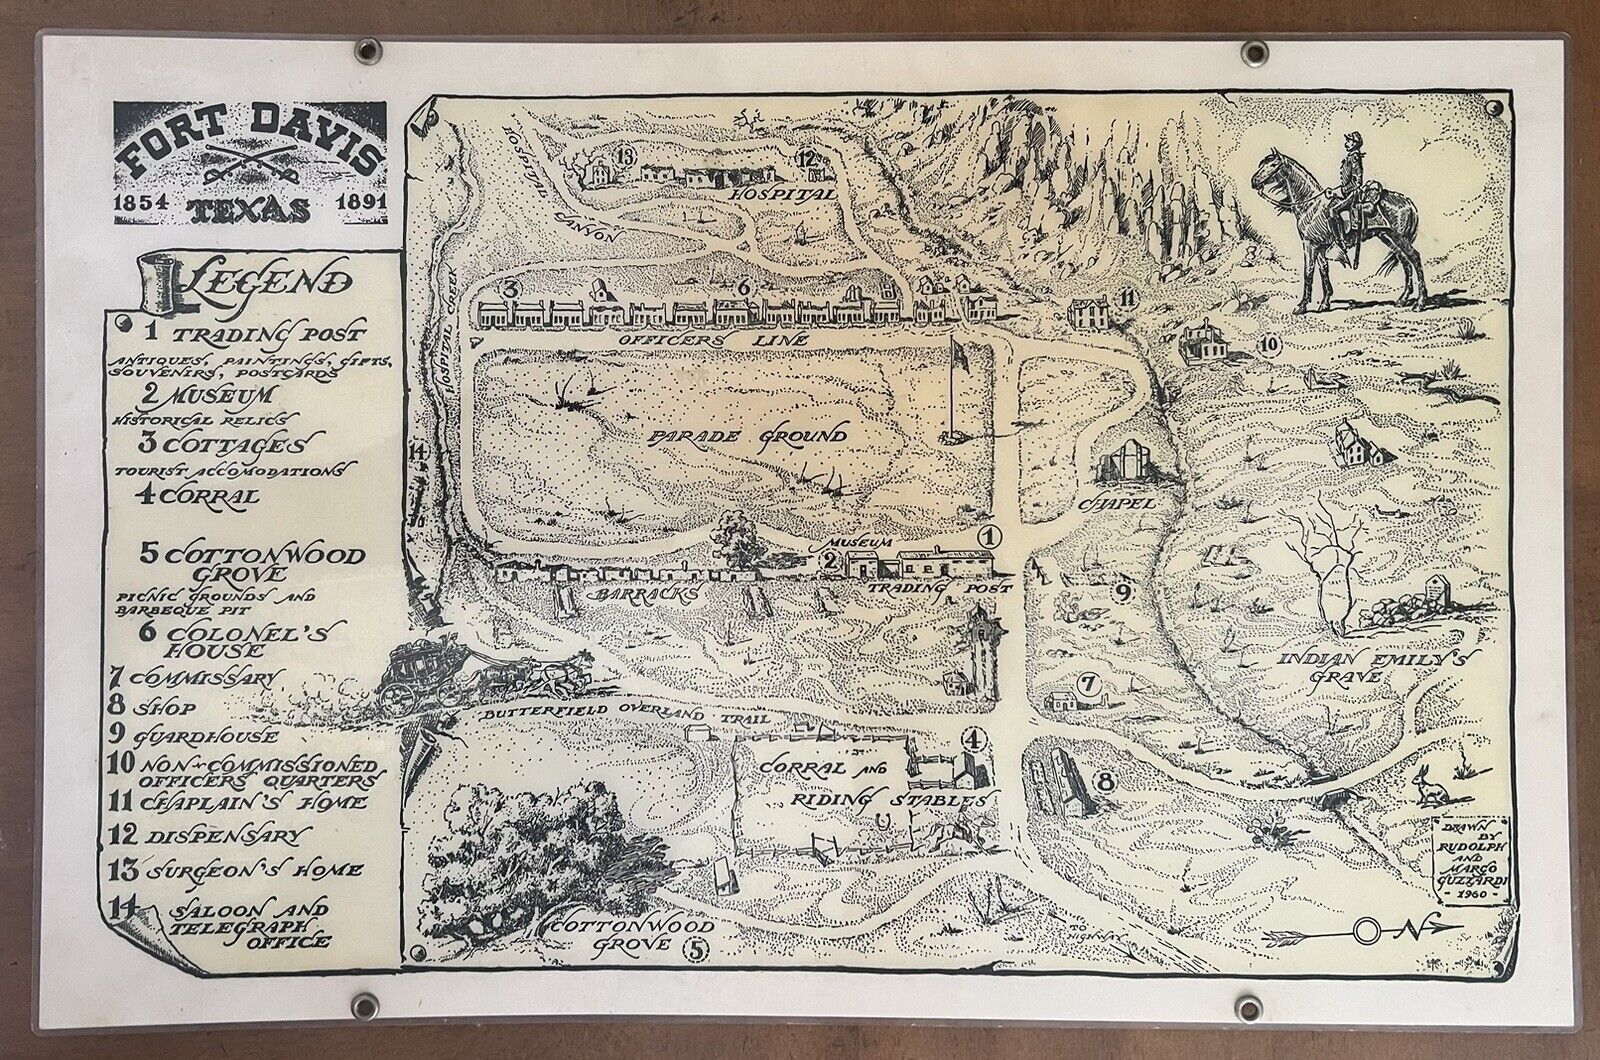 Rare Vintage Fort Davis Texas 1854-1891 Map Placemat Laminated Double Sided